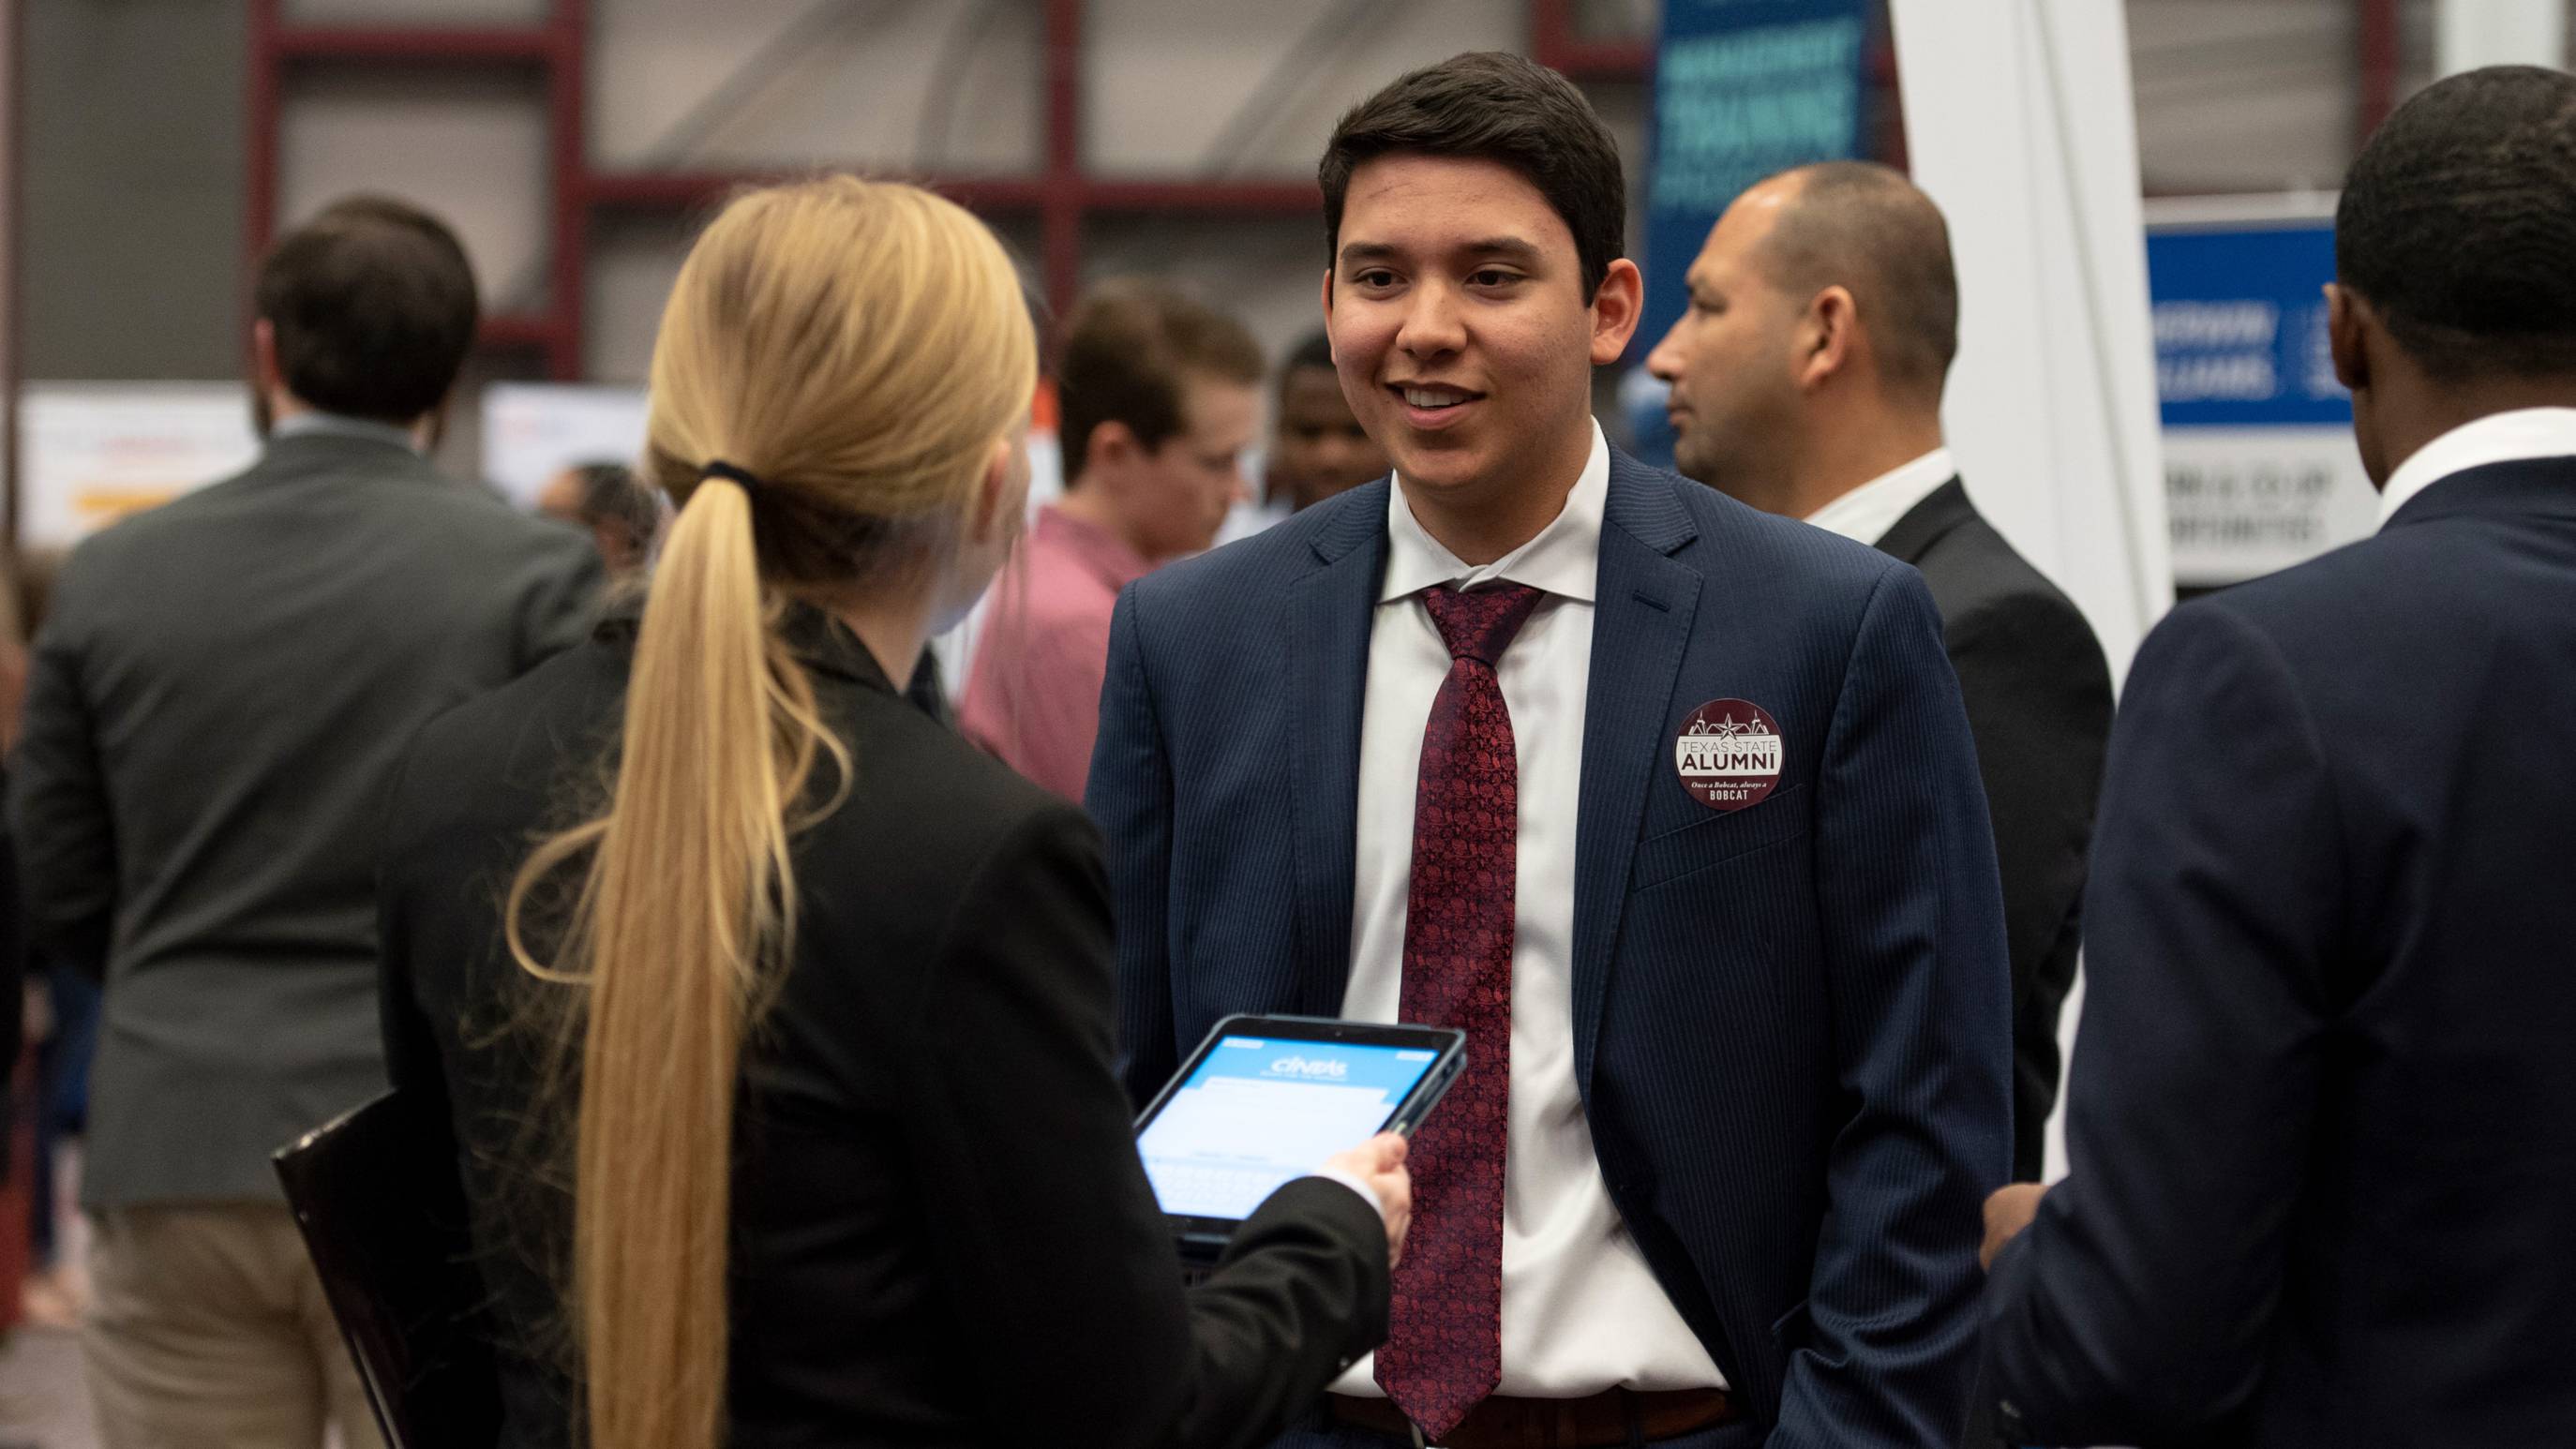 Two people in business attire talking at a career event